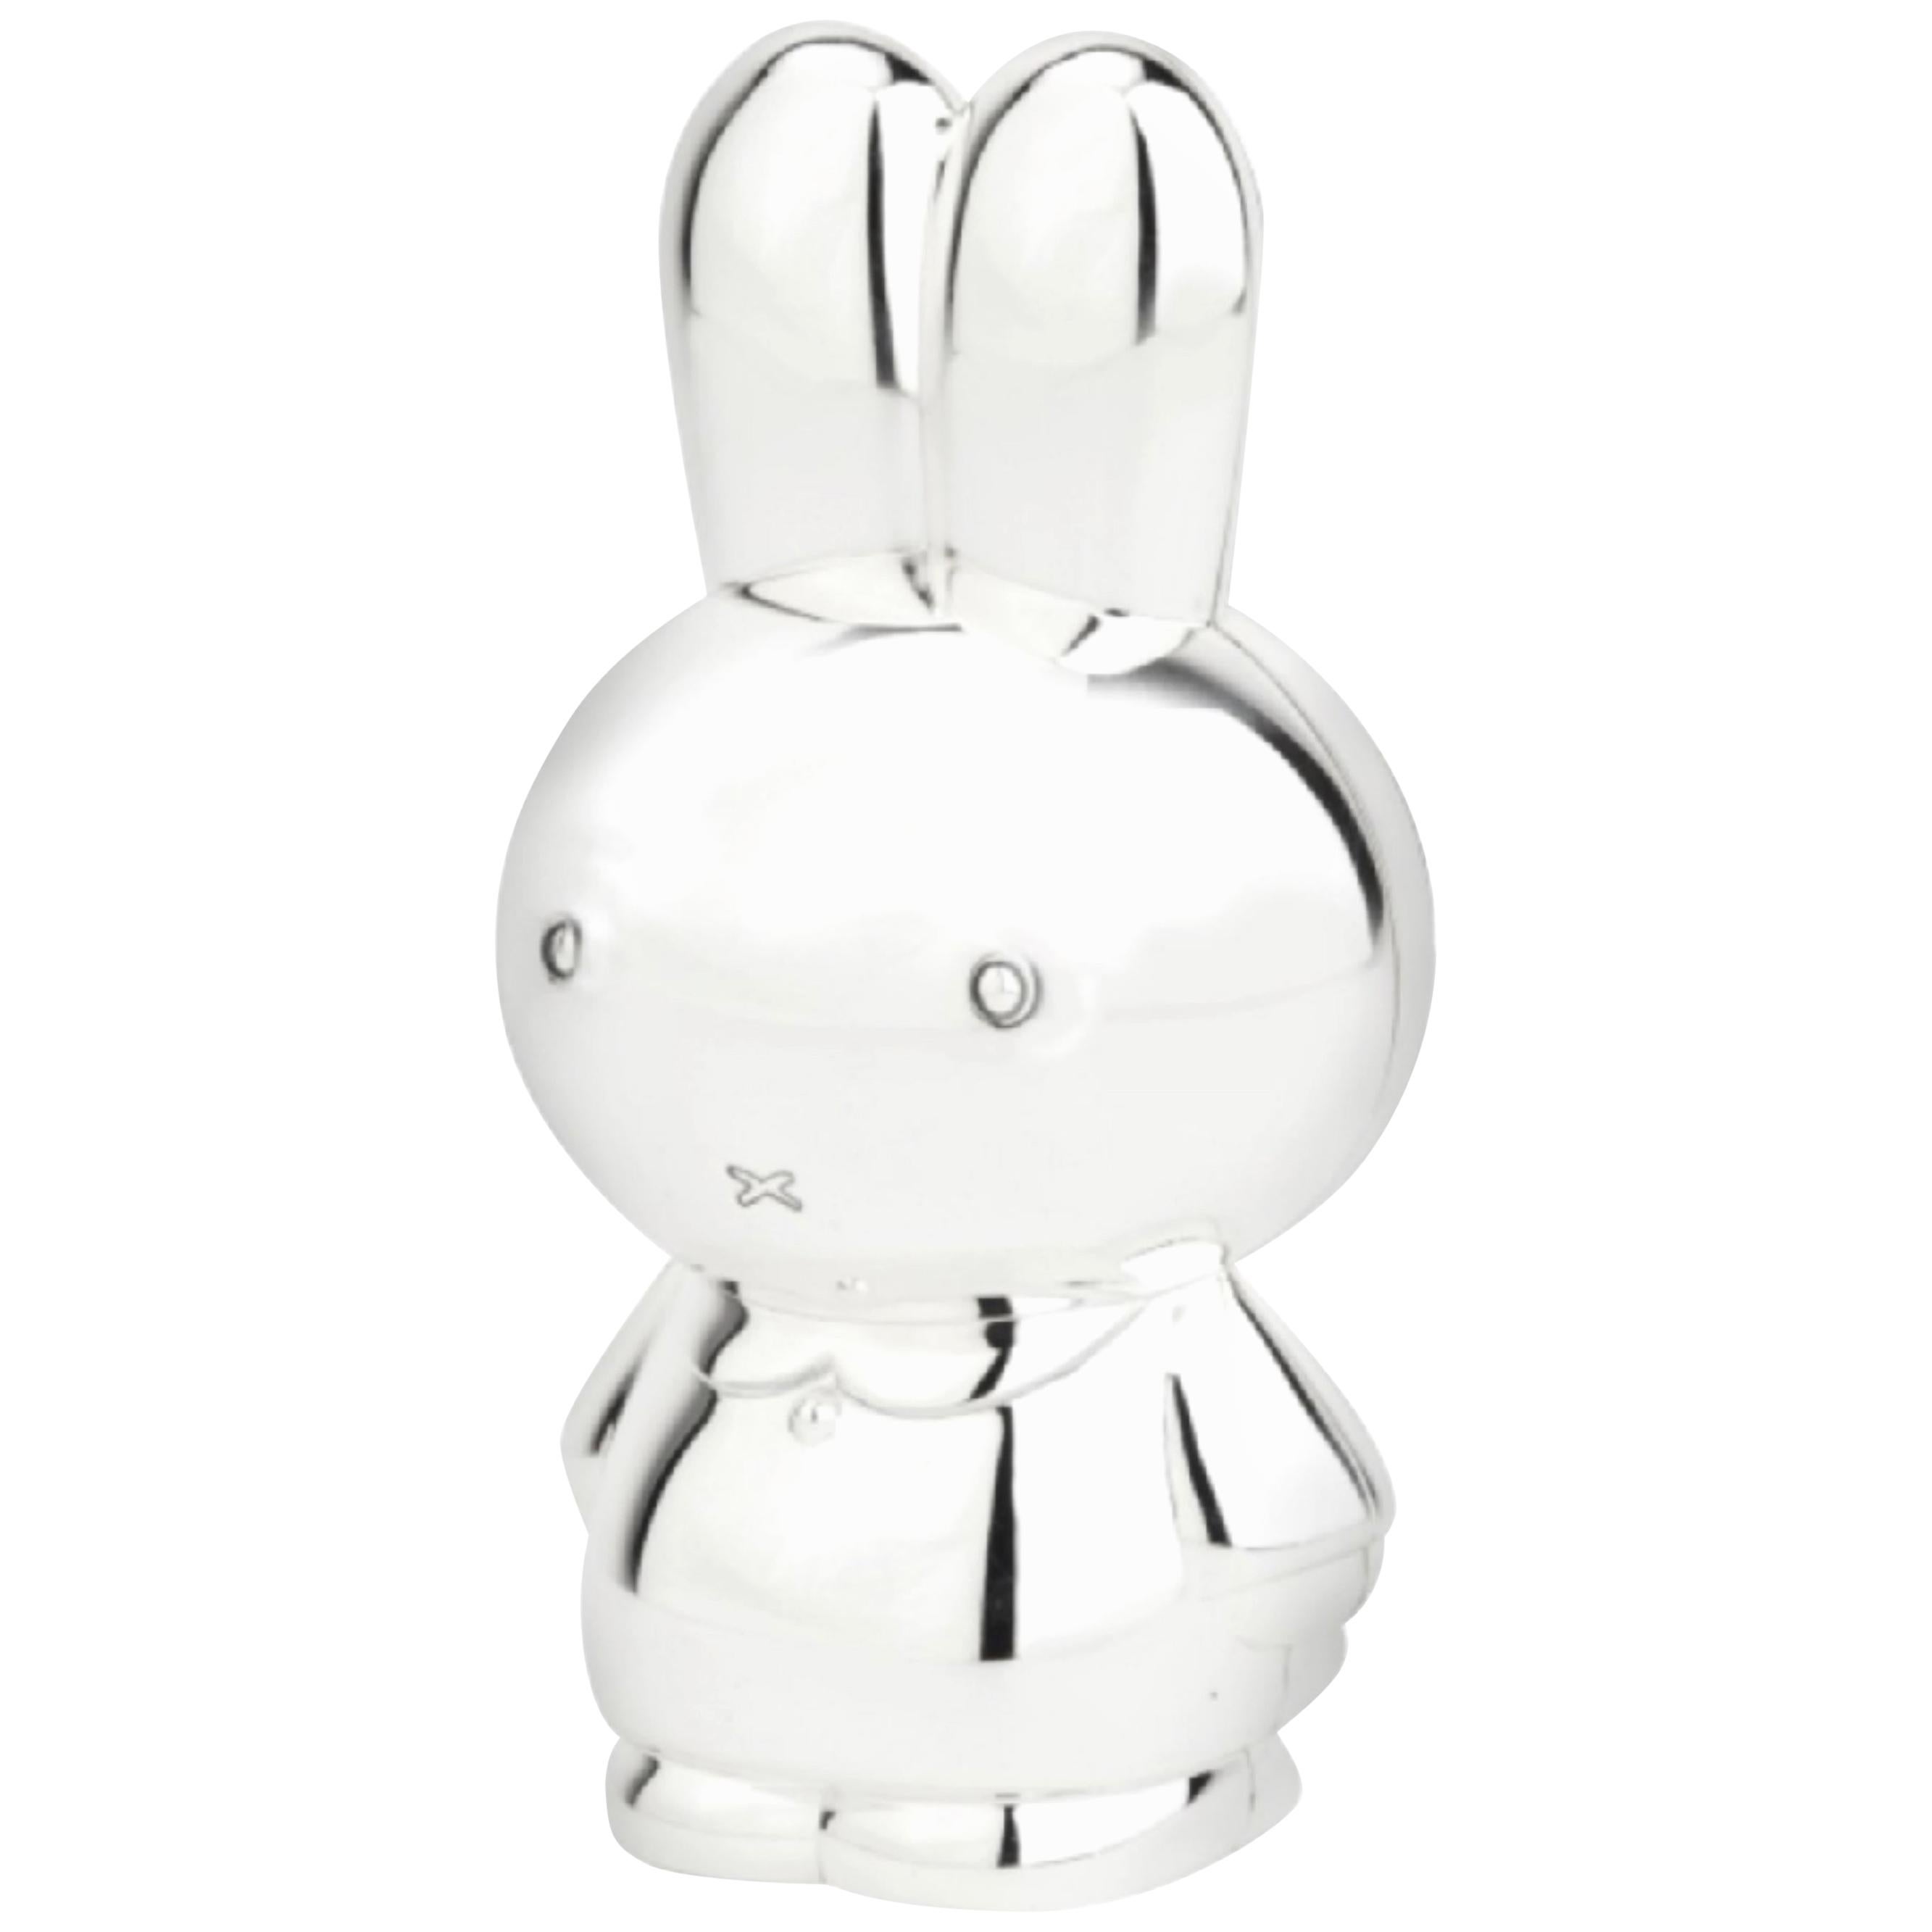 Miffy Silver Plated Money Bank by Dutch Illustrator and Writer Dick Bruna, 1955